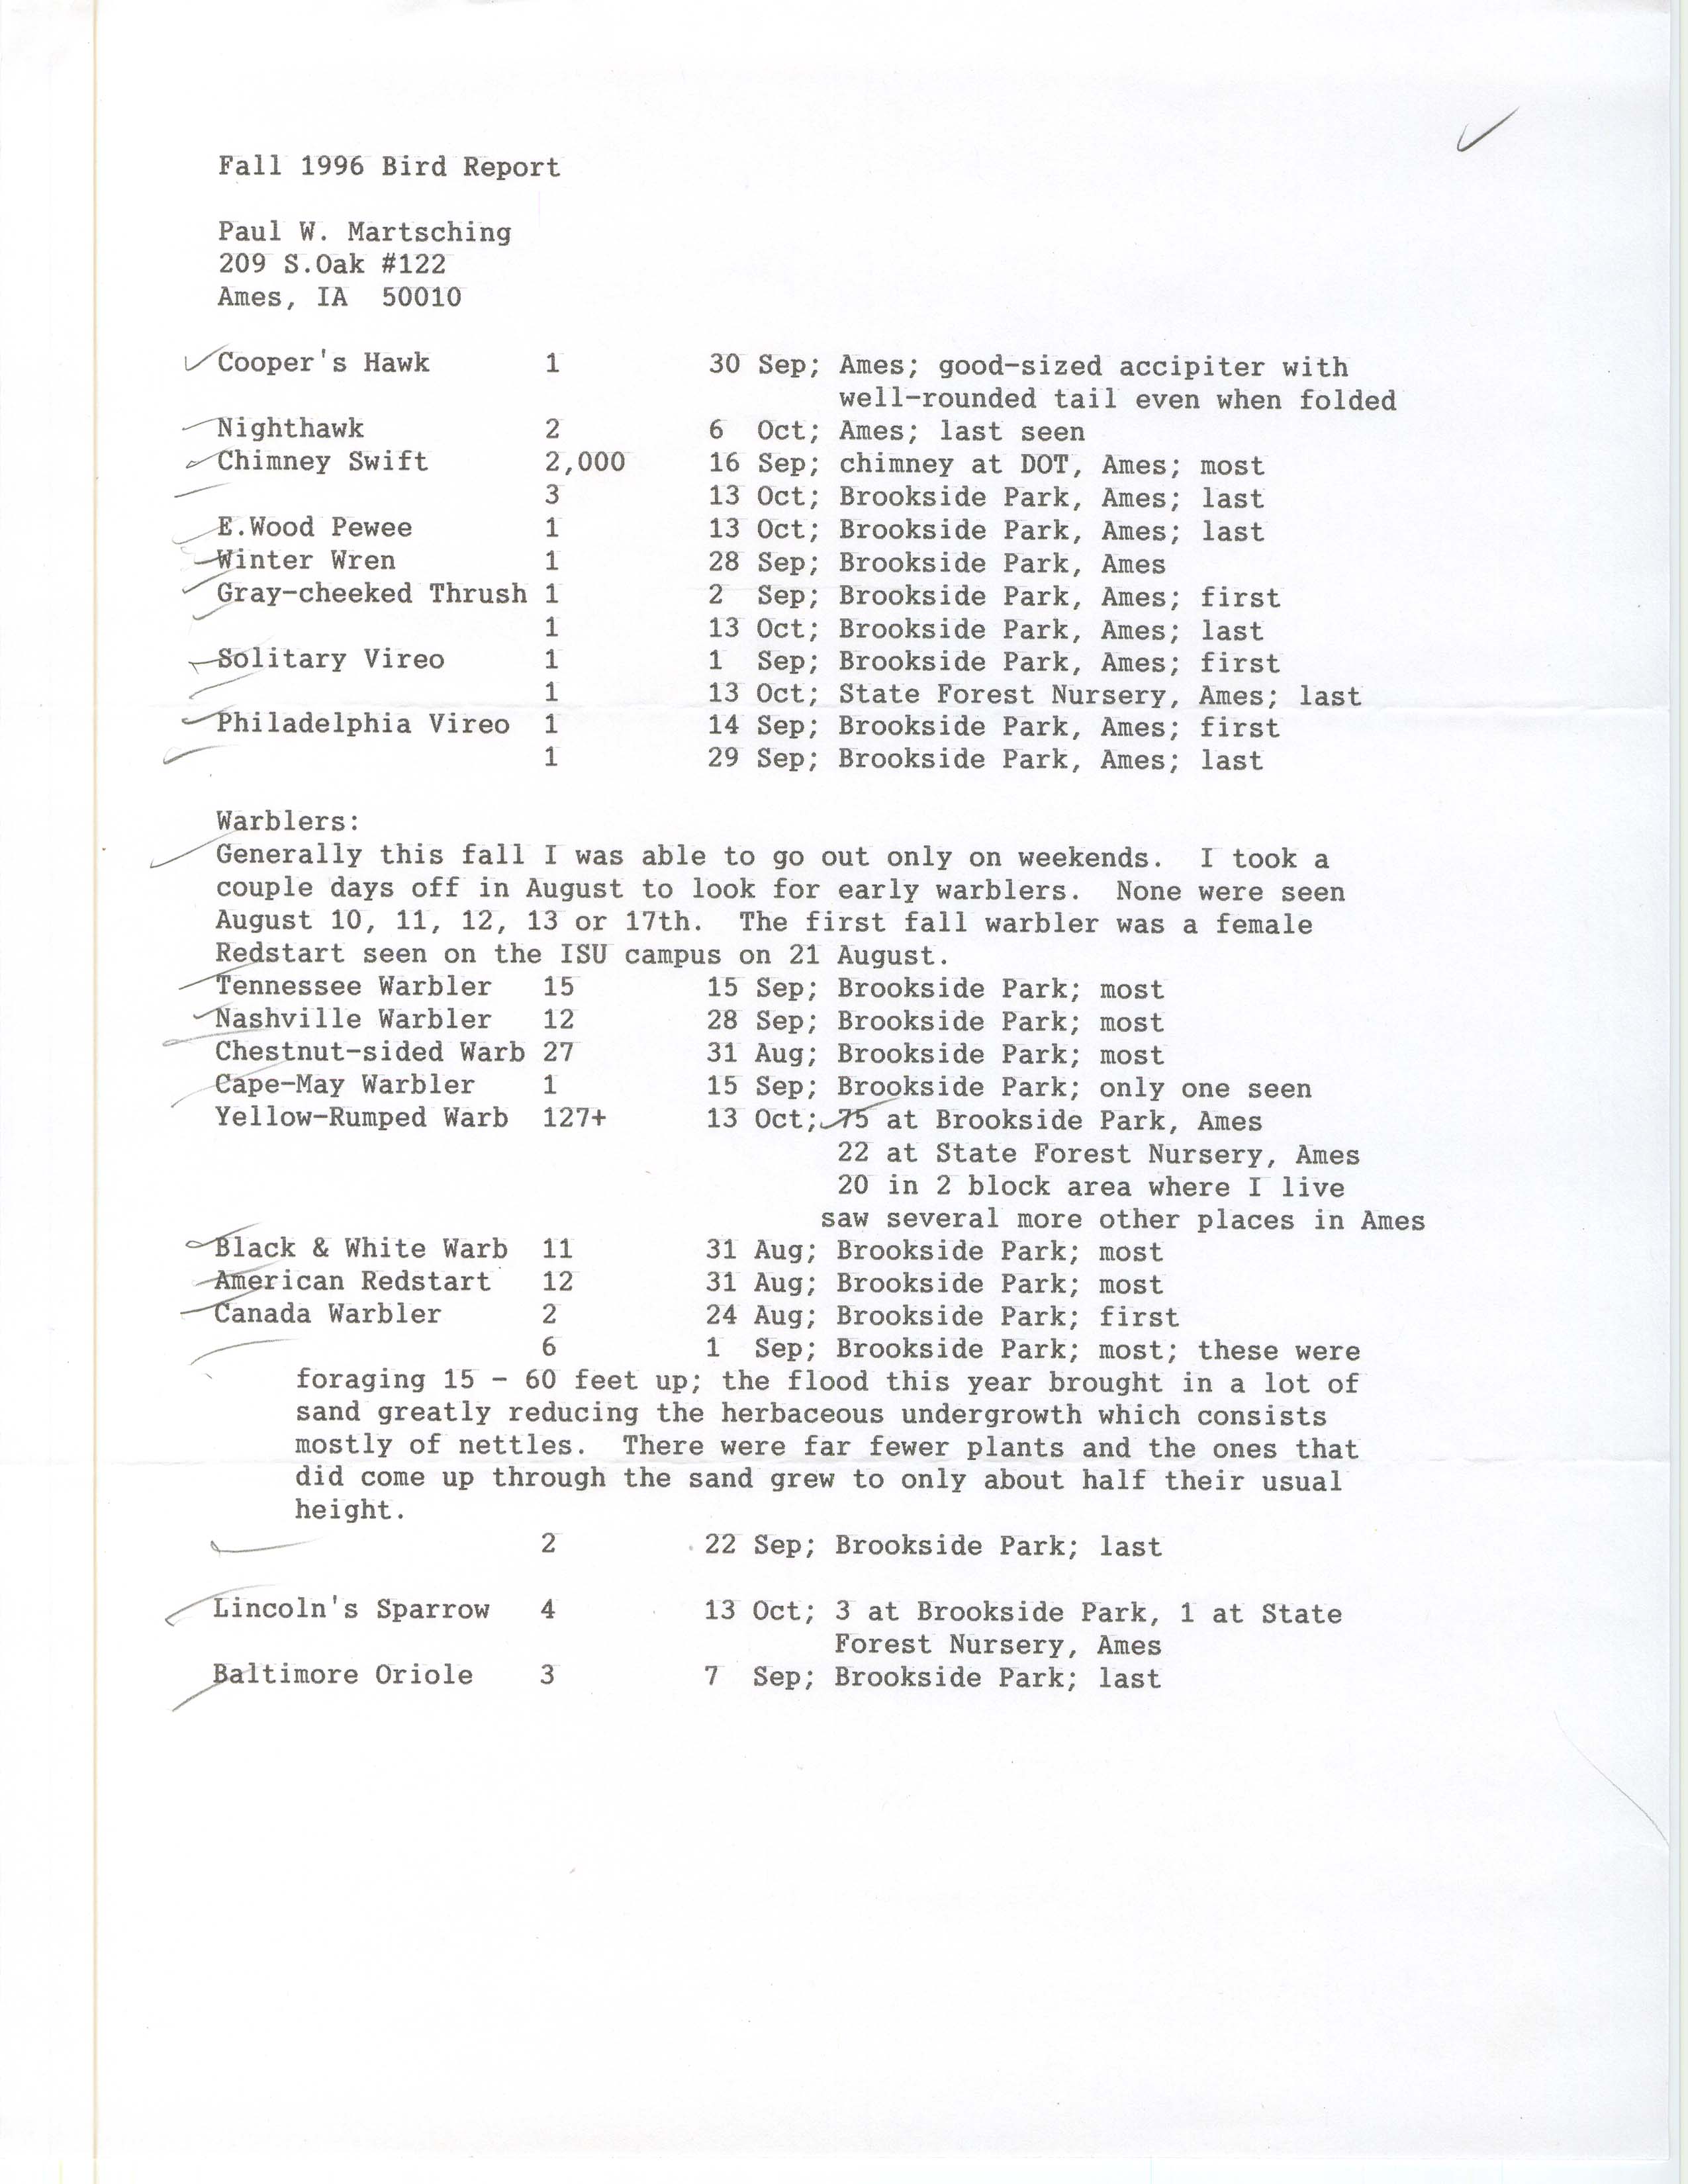 Field notes contributed by Paul Martsching, fall 1996